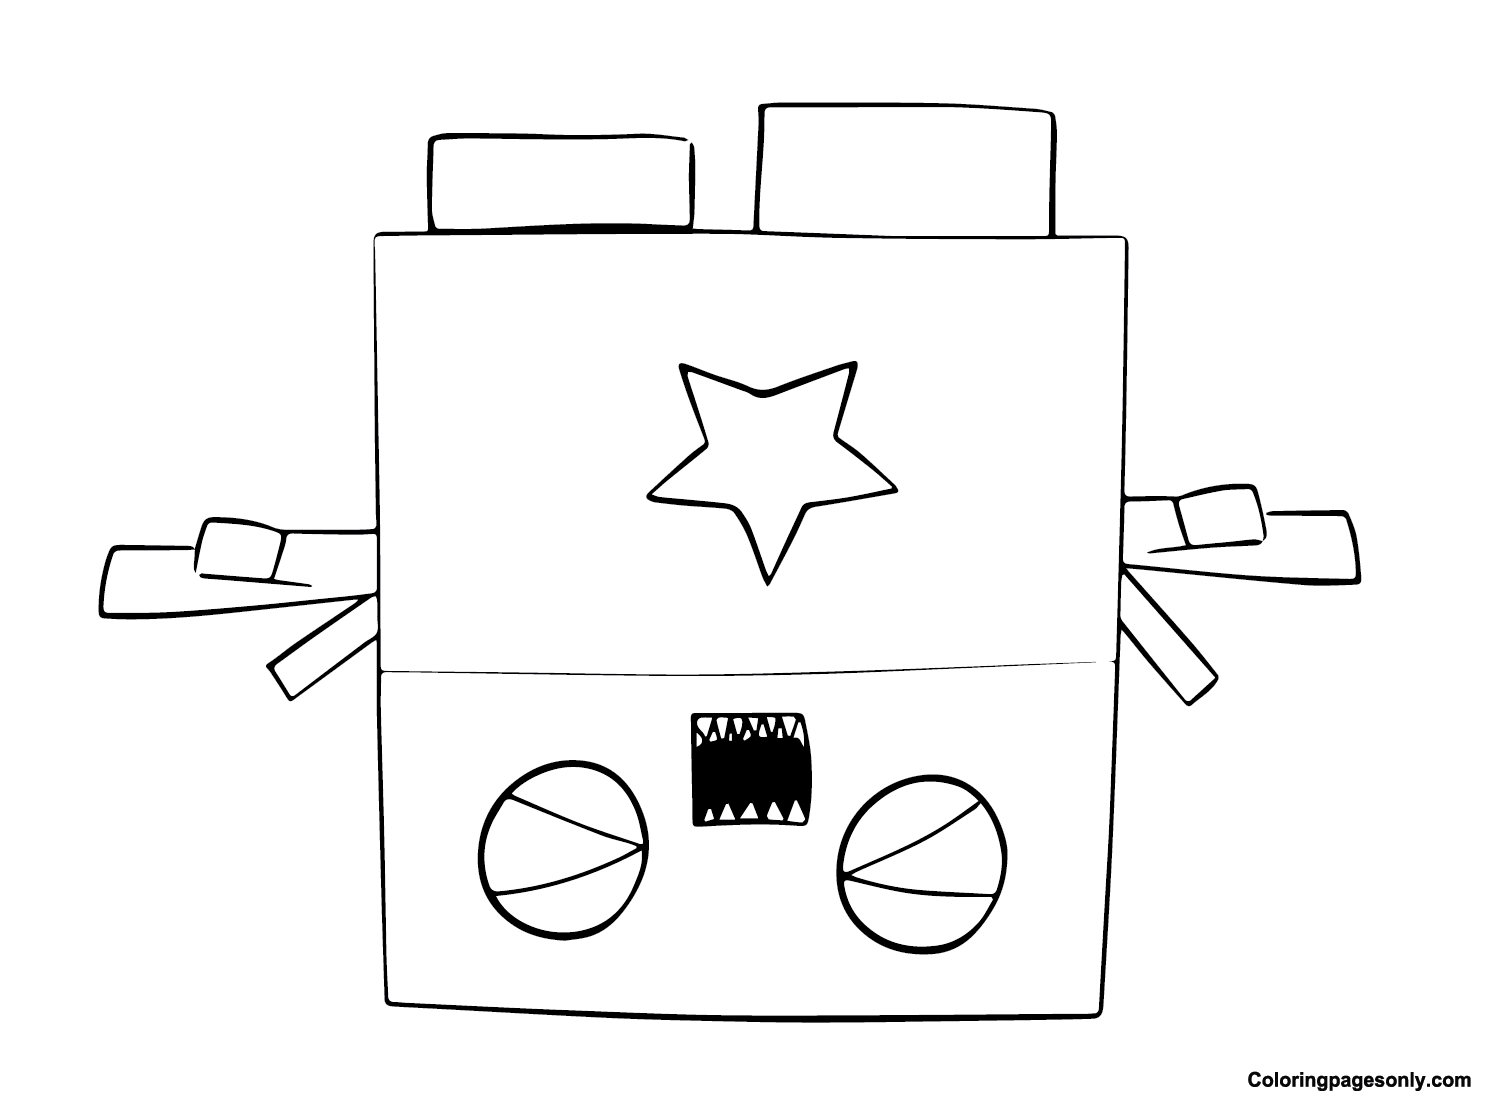 Boxy Boo Drawing Coloring Page